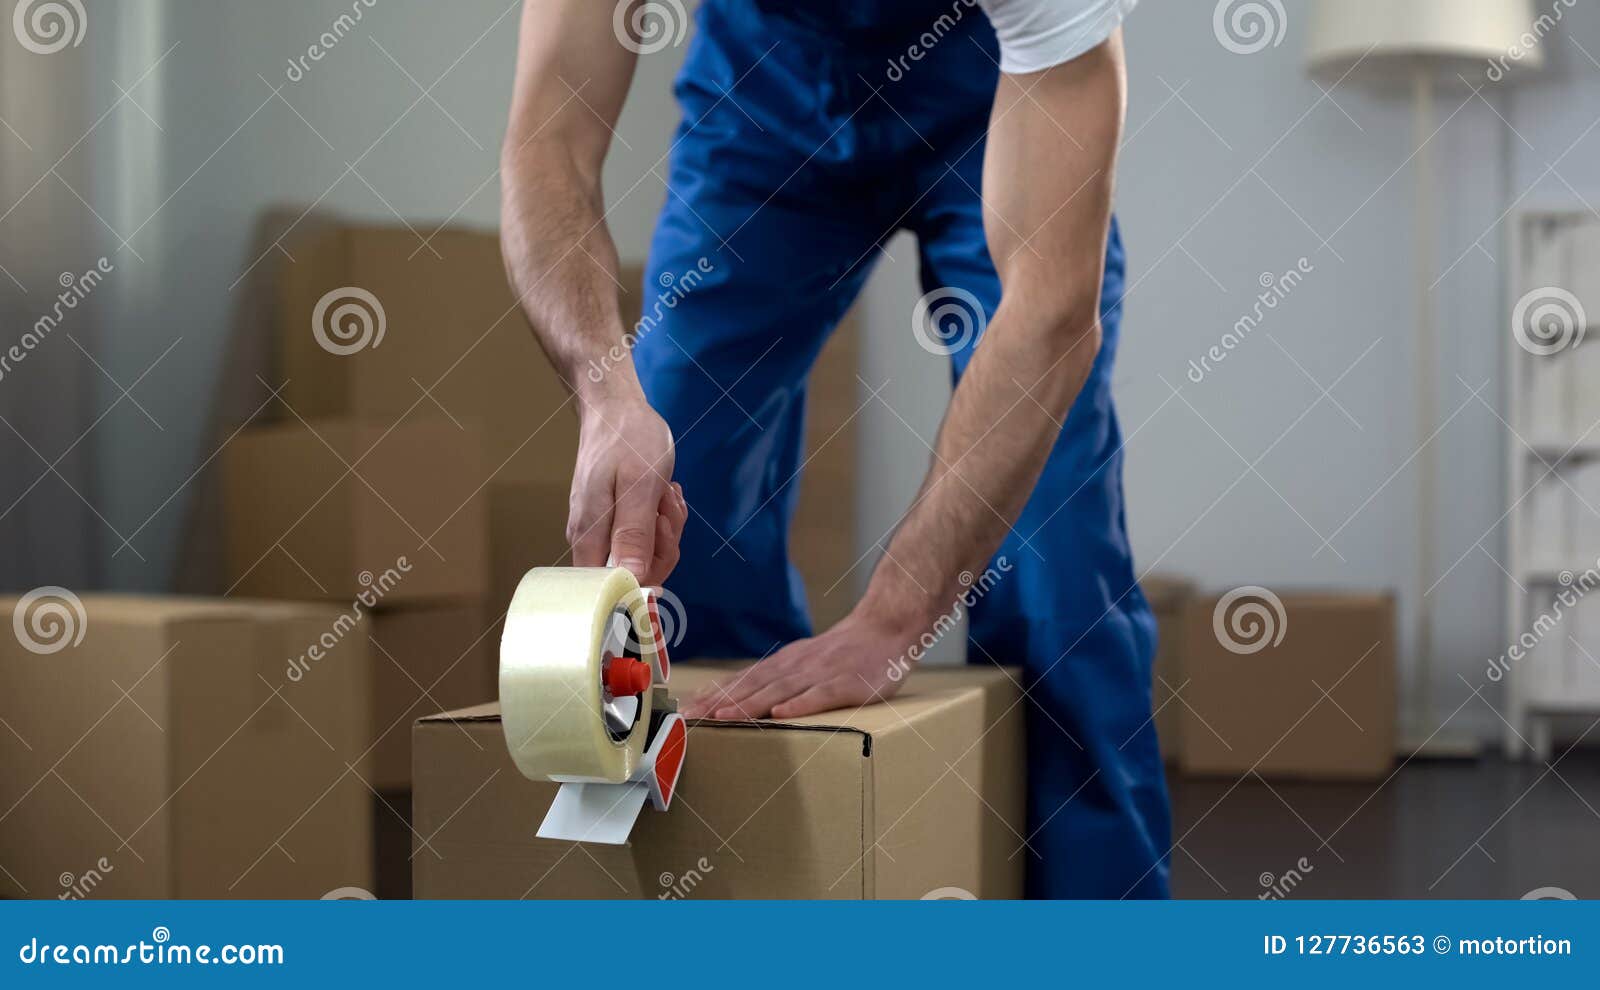 moving company worker packing cardboard boxes, quality delivery services